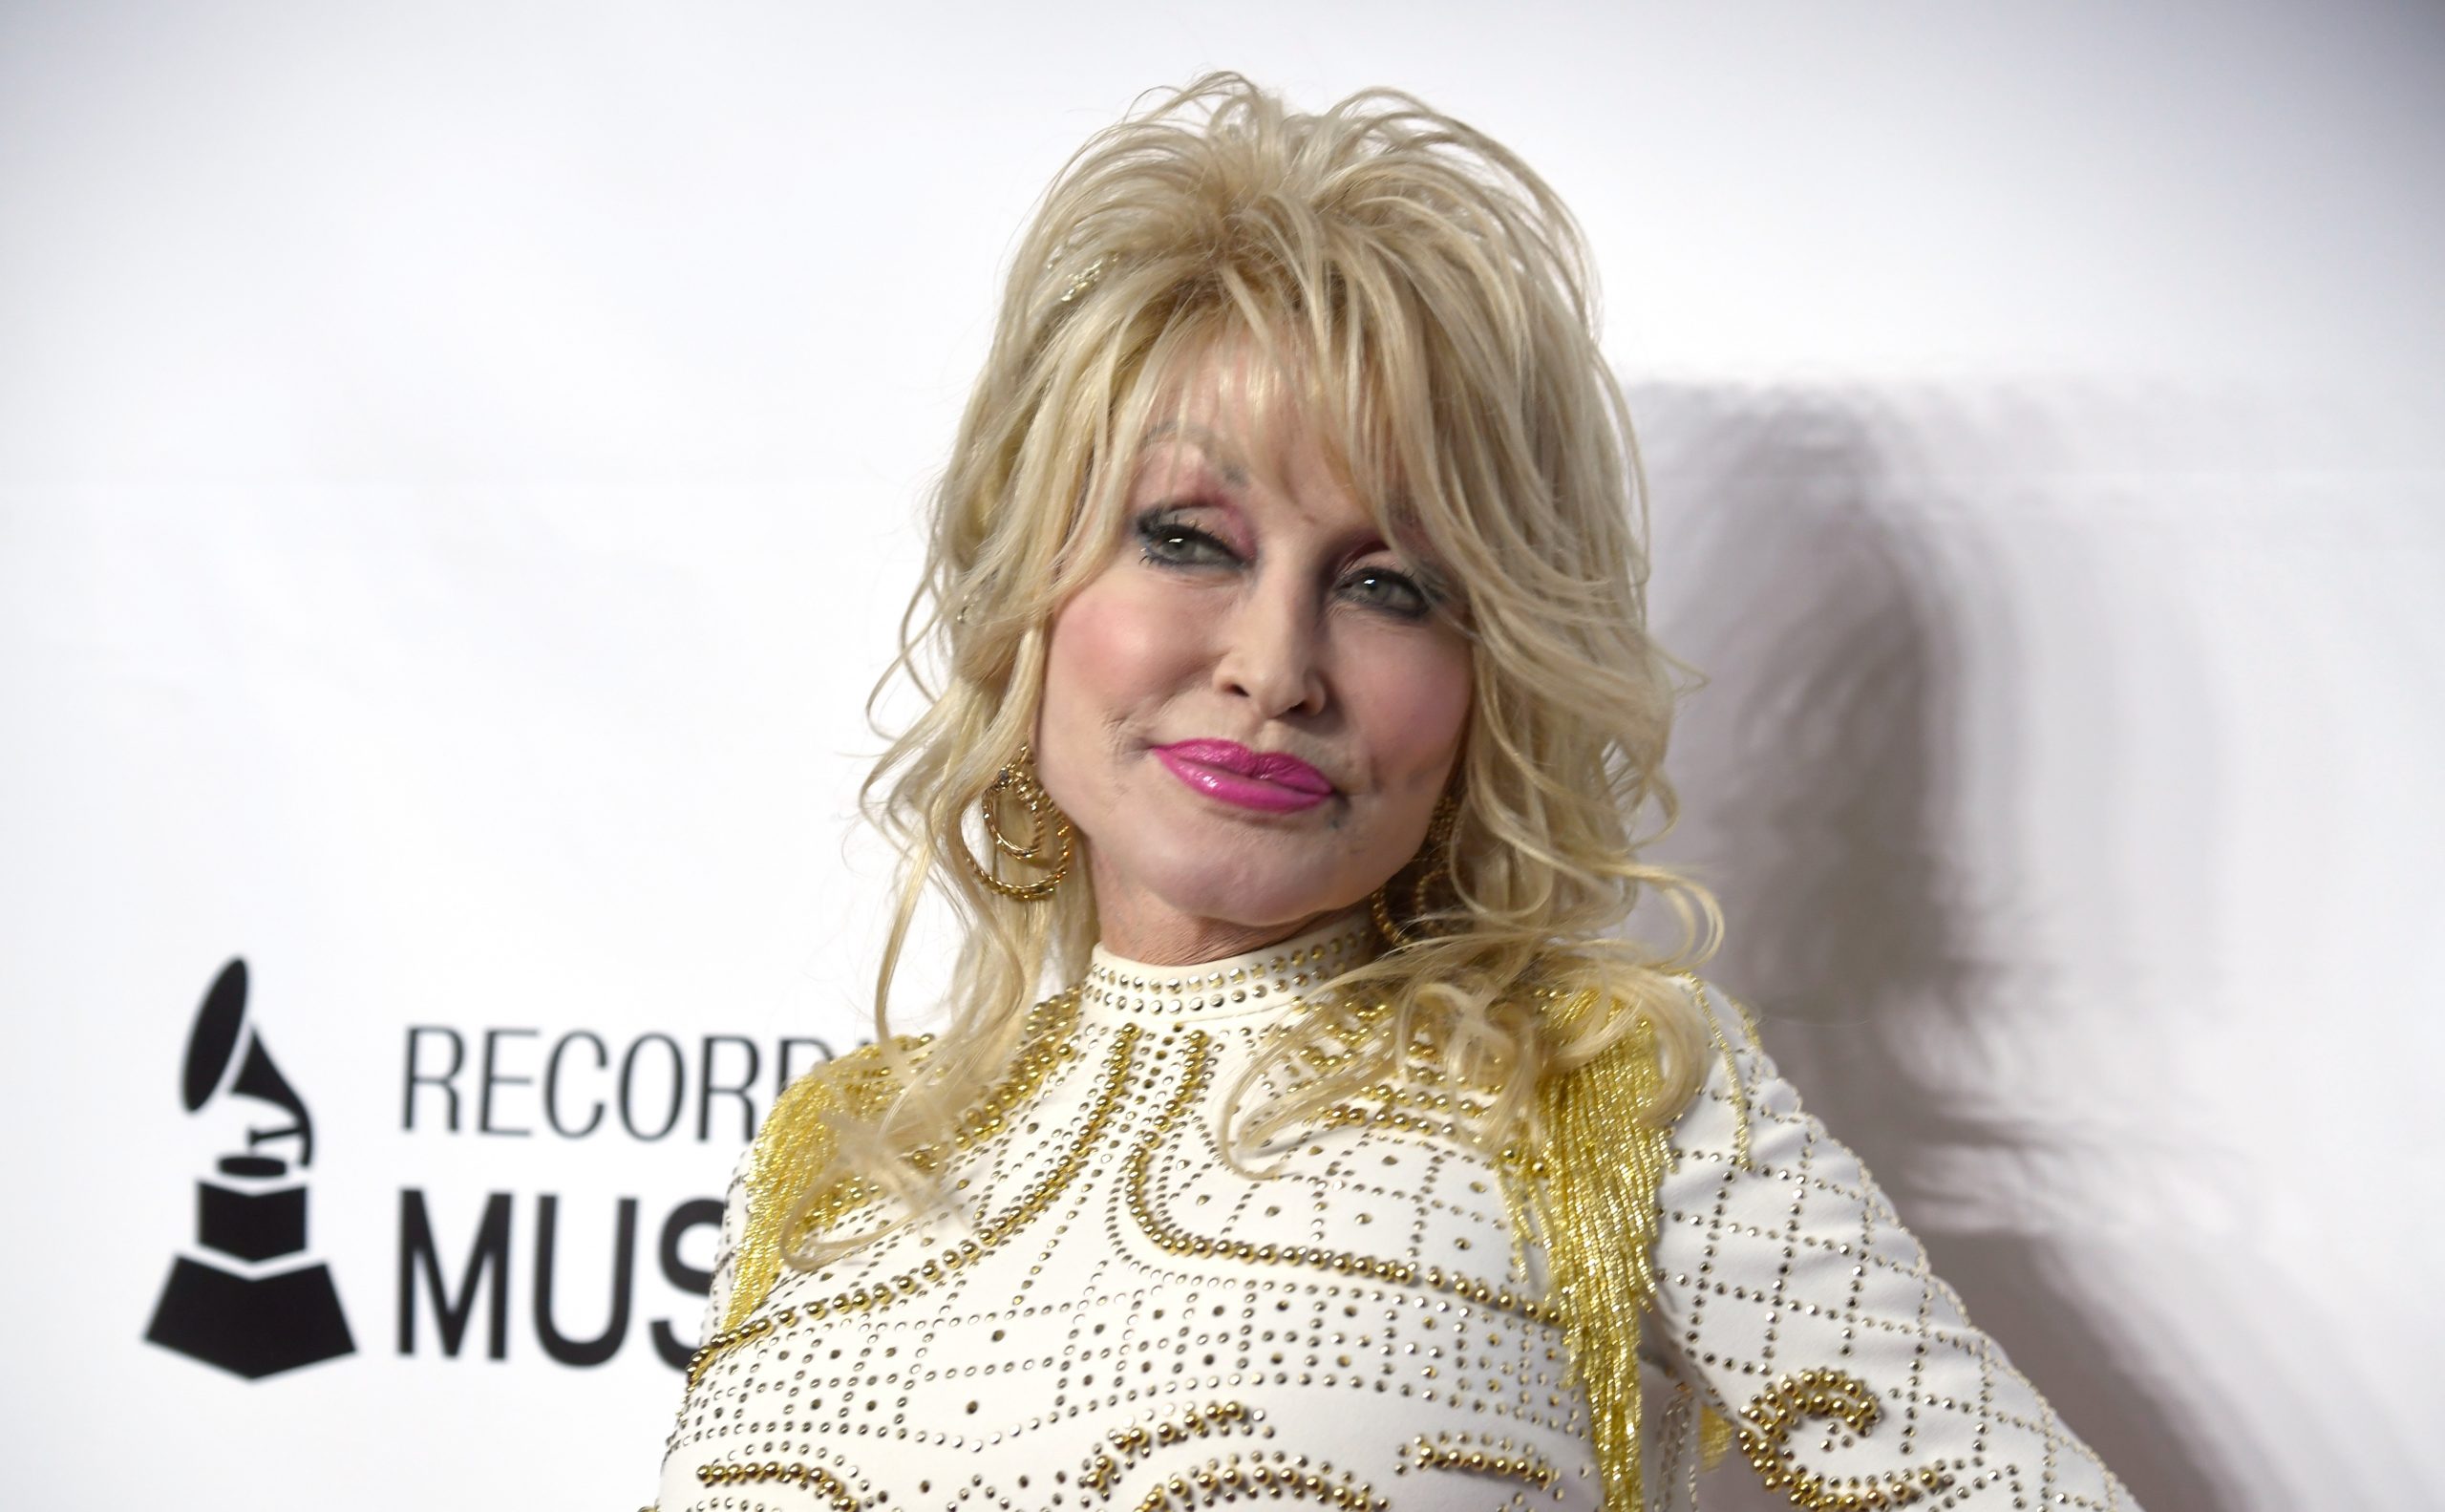 Dolly Parton smirks as she looks on wearing a white outfit